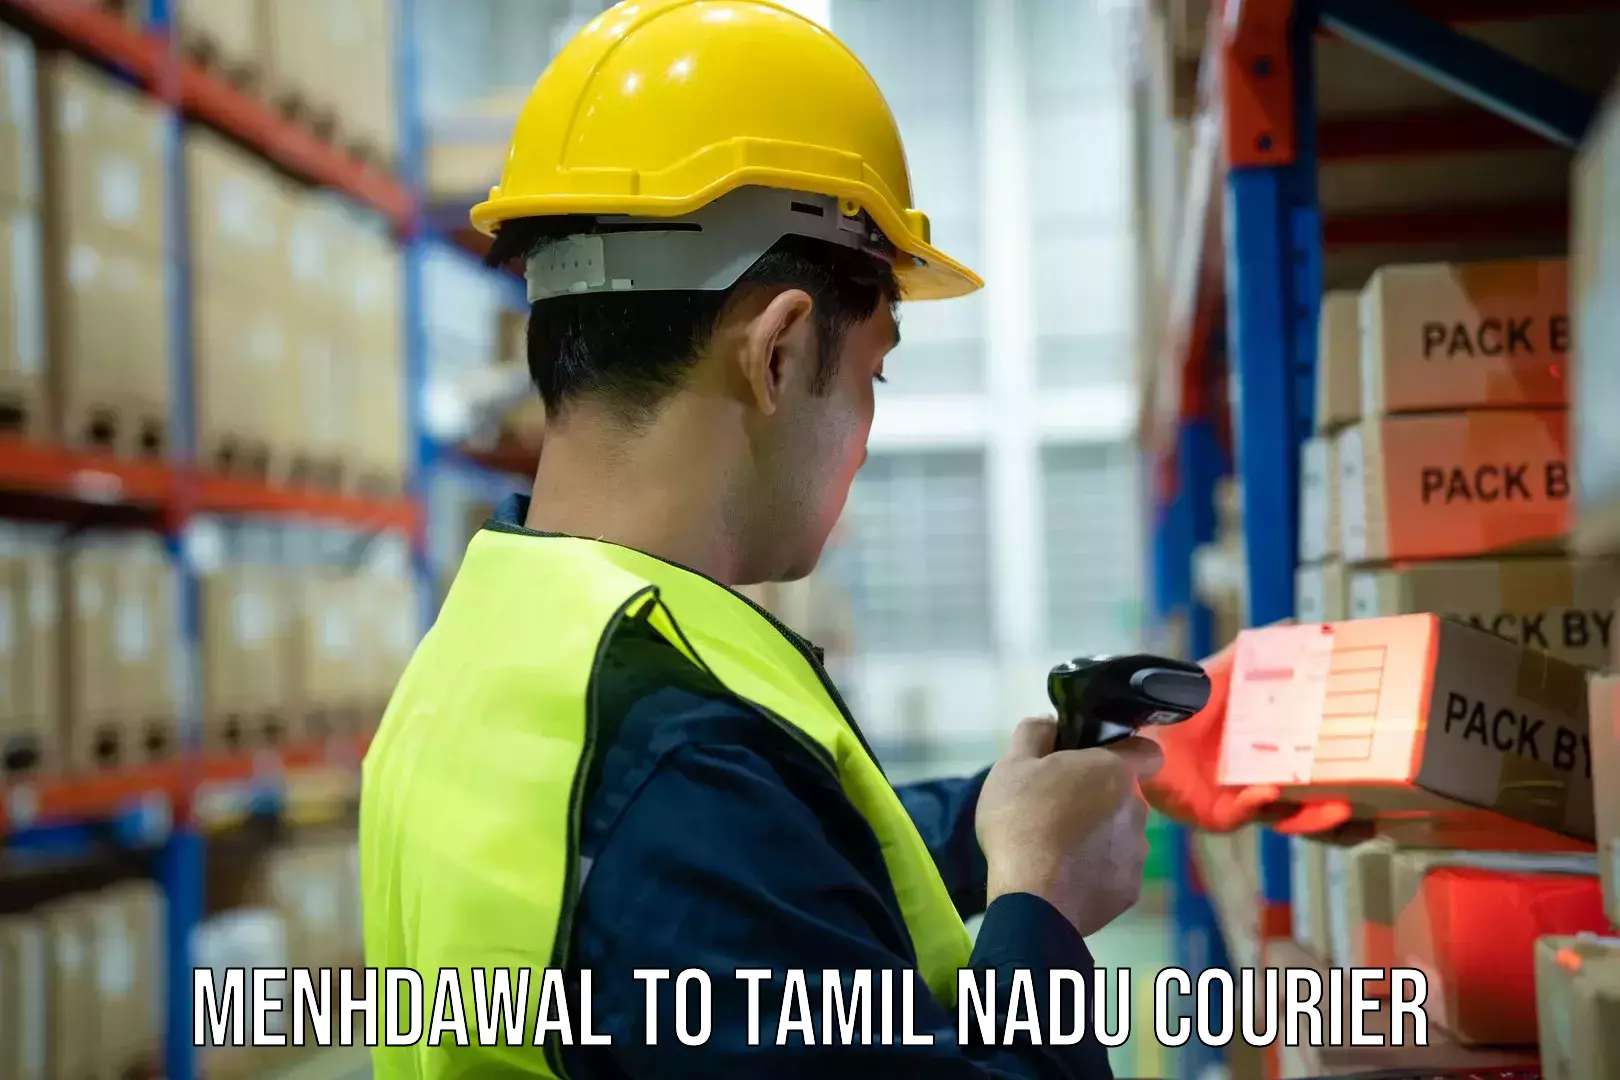 Express delivery network Menhdawal to Tamil Nadu